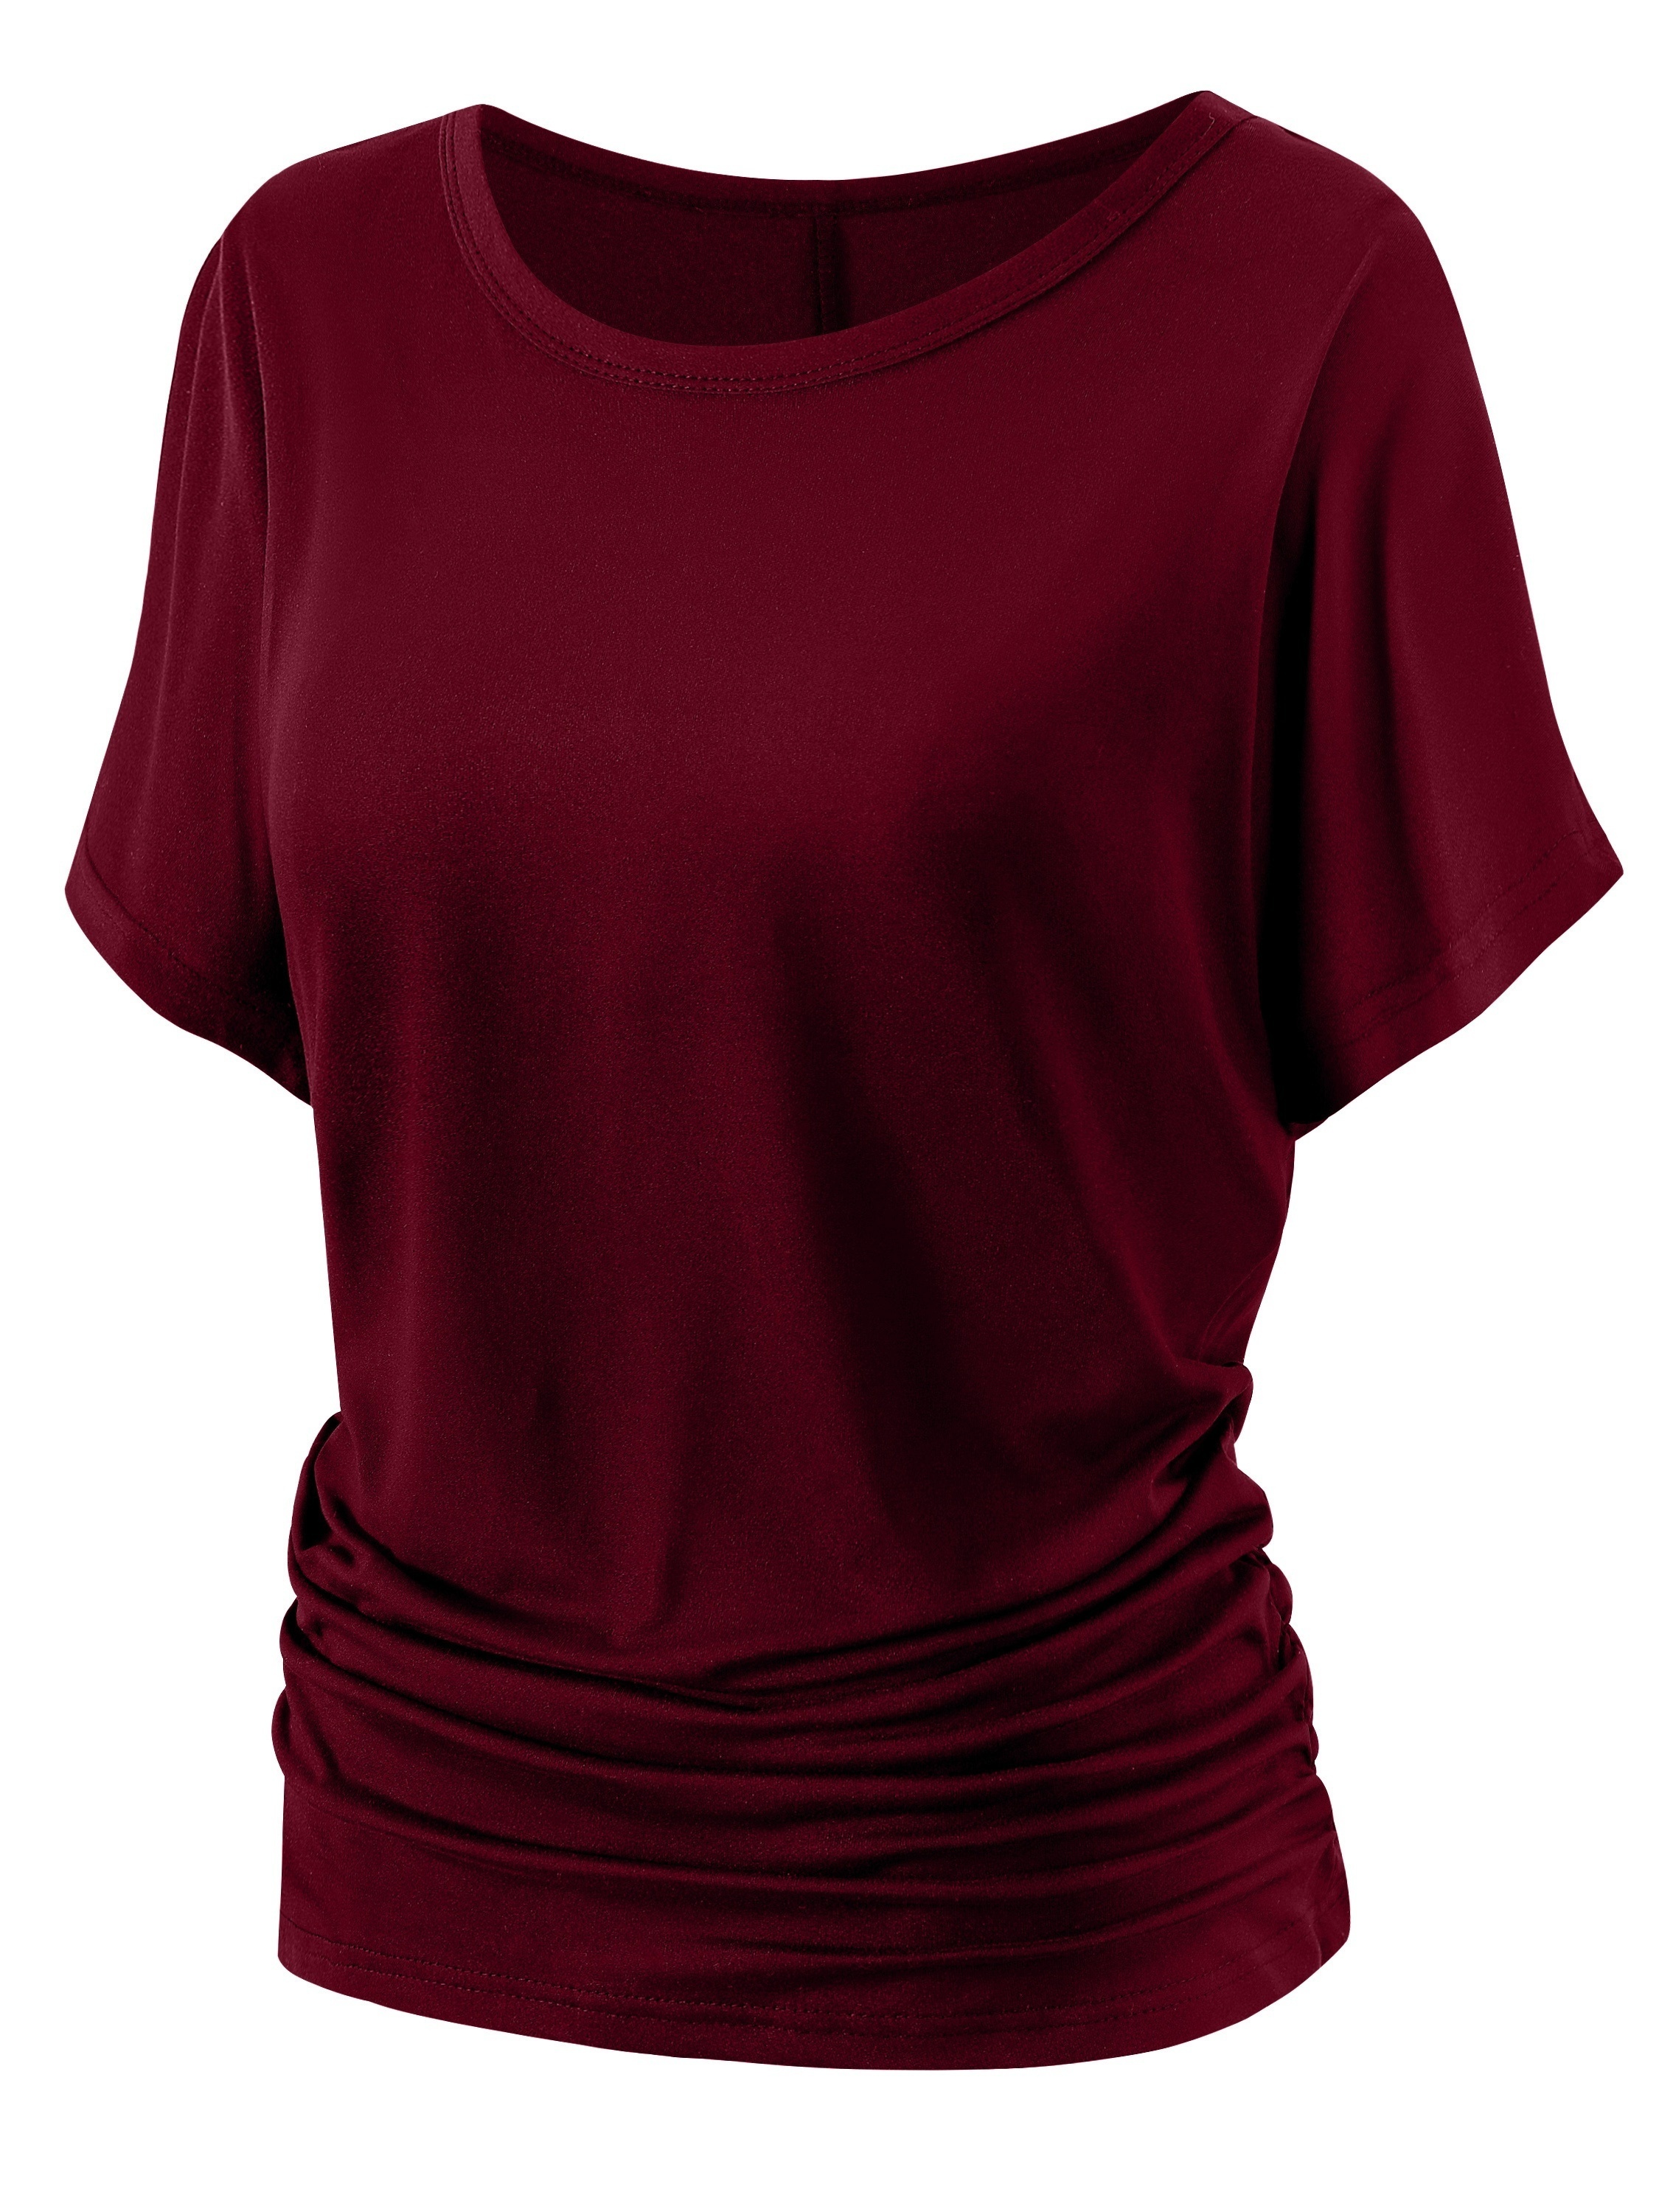 Summer-Ready Casual Chic T-Shirt: Non-Sheer, Comfortable Loose Fit, Durable & Stylish for Spring & Summer